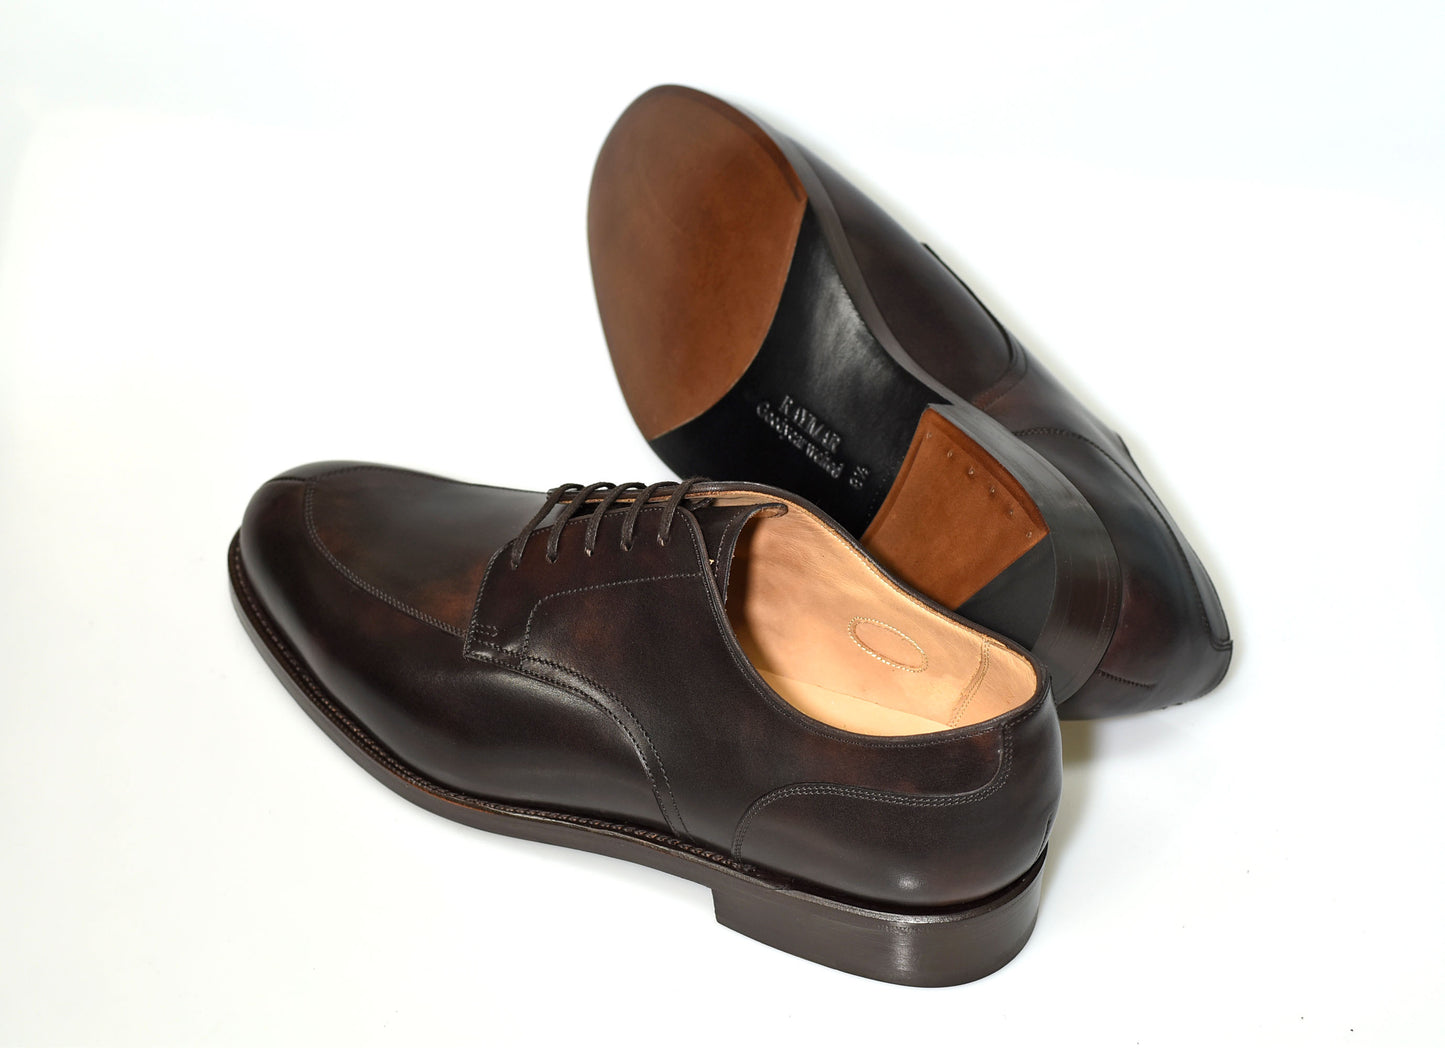 “Amber” V Tip Split Toe Derby, Dark Brown Dress Shoes, Zonta Museum Calf, Goodyear welted, US size 5 1/2 ~ 10